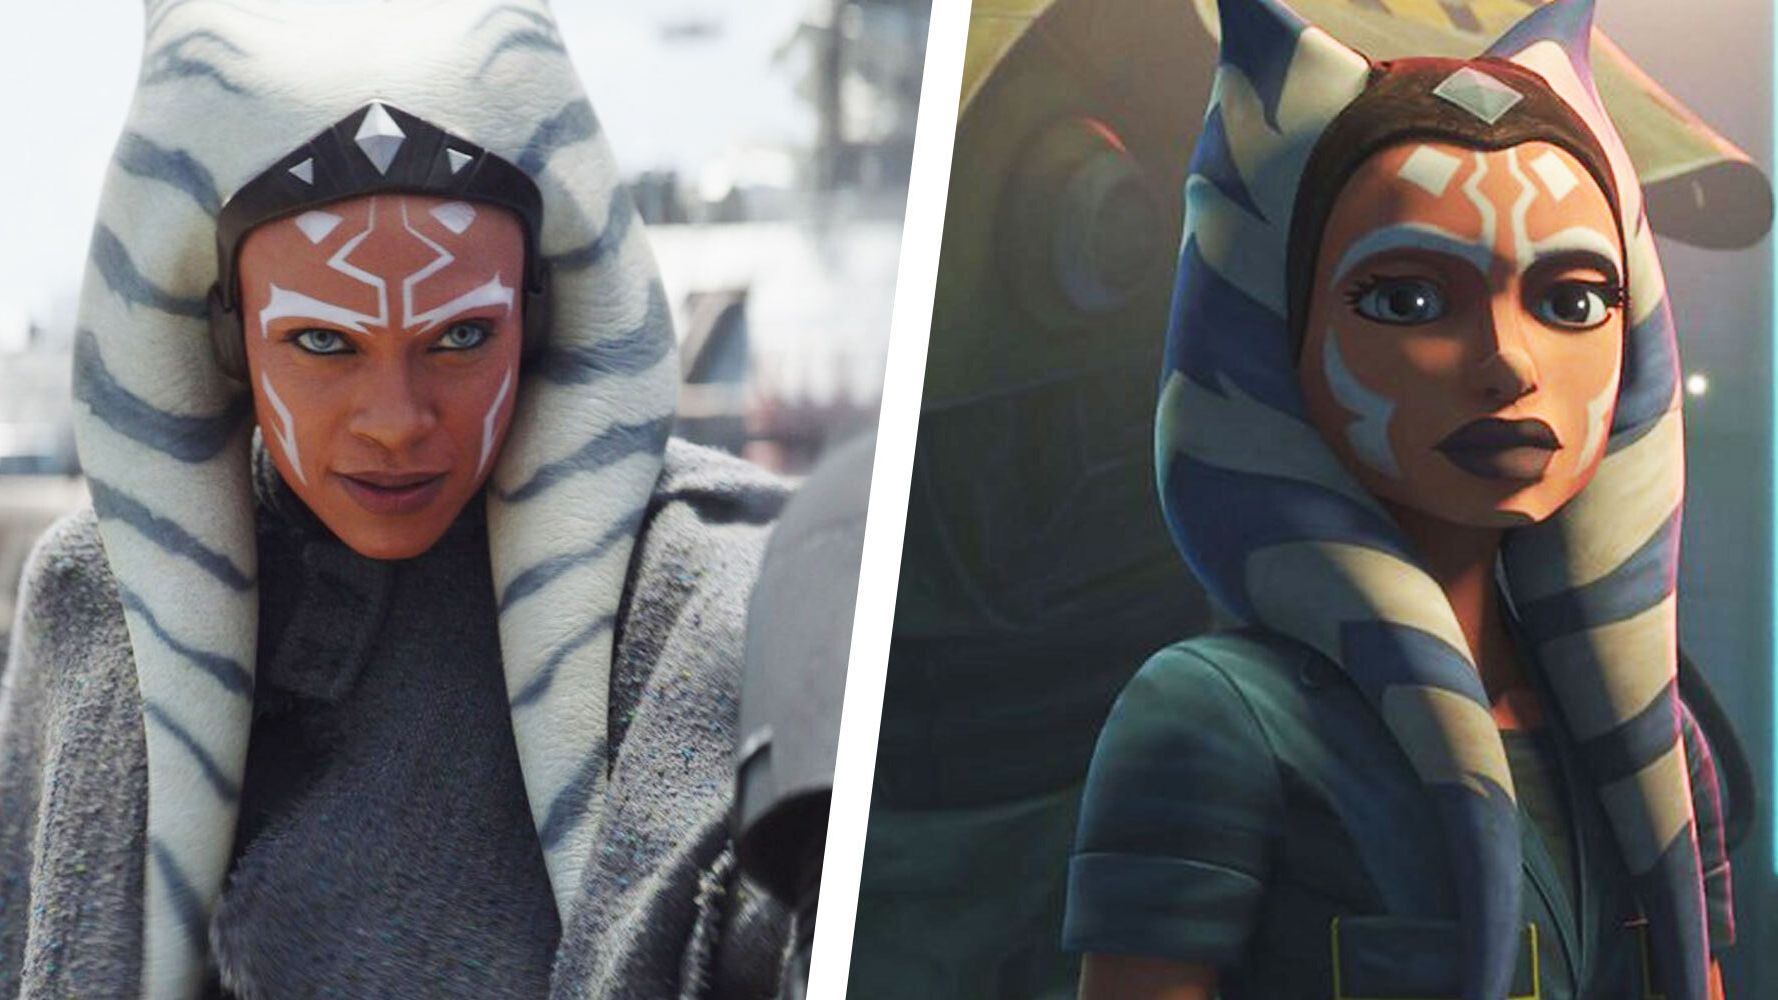 clyde castle recommends pictures of ahsoka from star wars pic